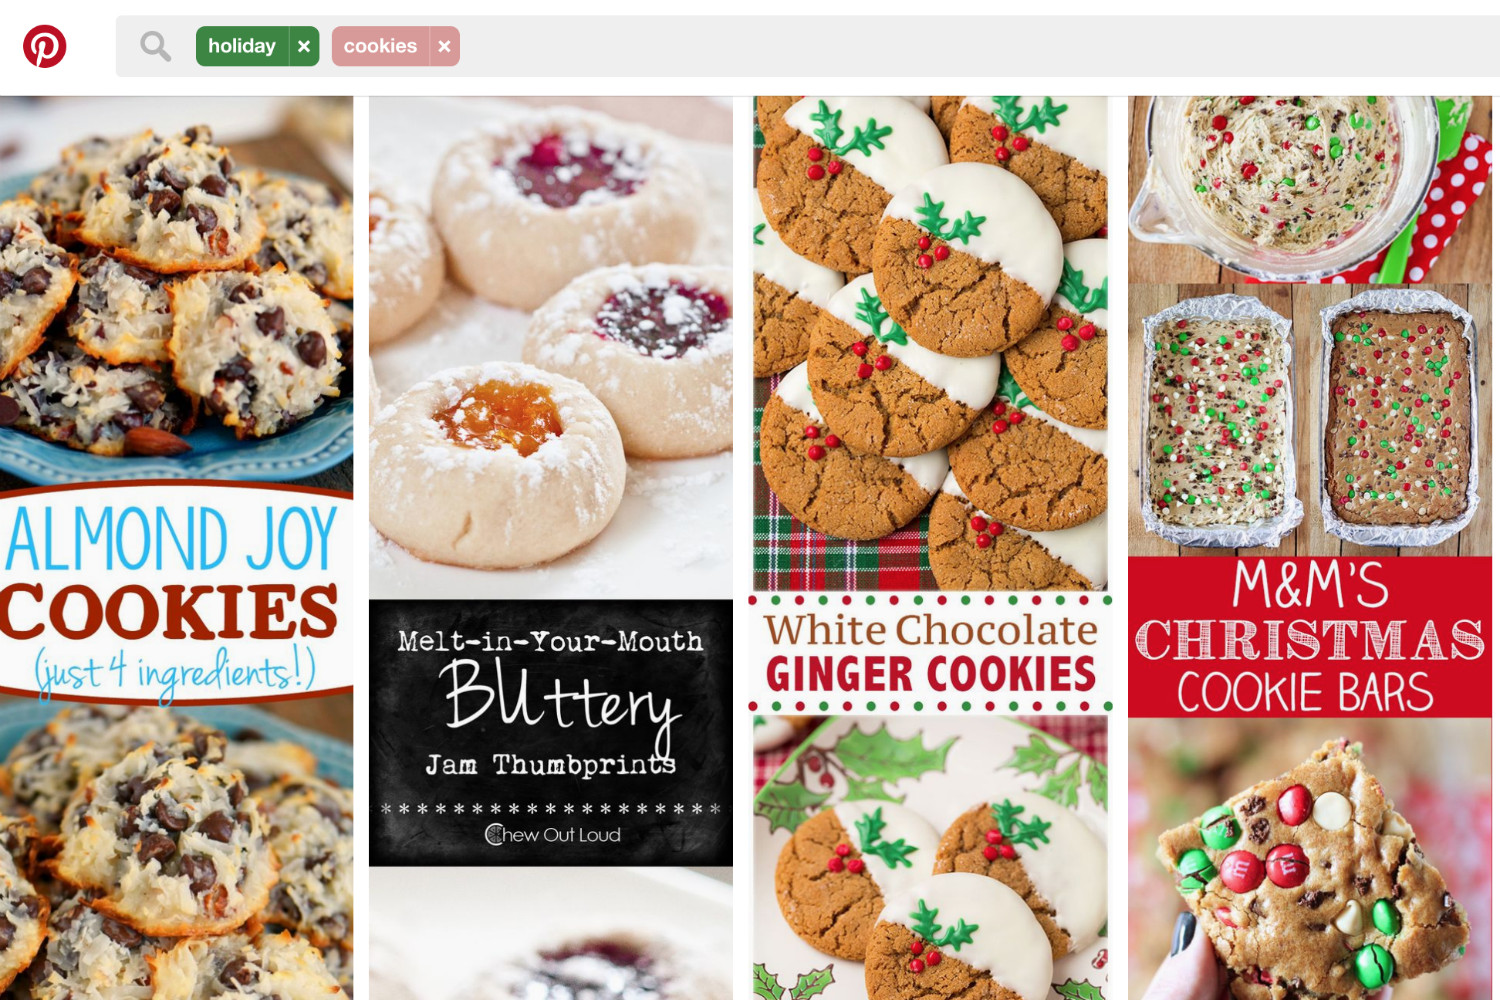 Pinterest Christmas Cookies
 What is Pinterest’s most popular Christmas cookie recipe